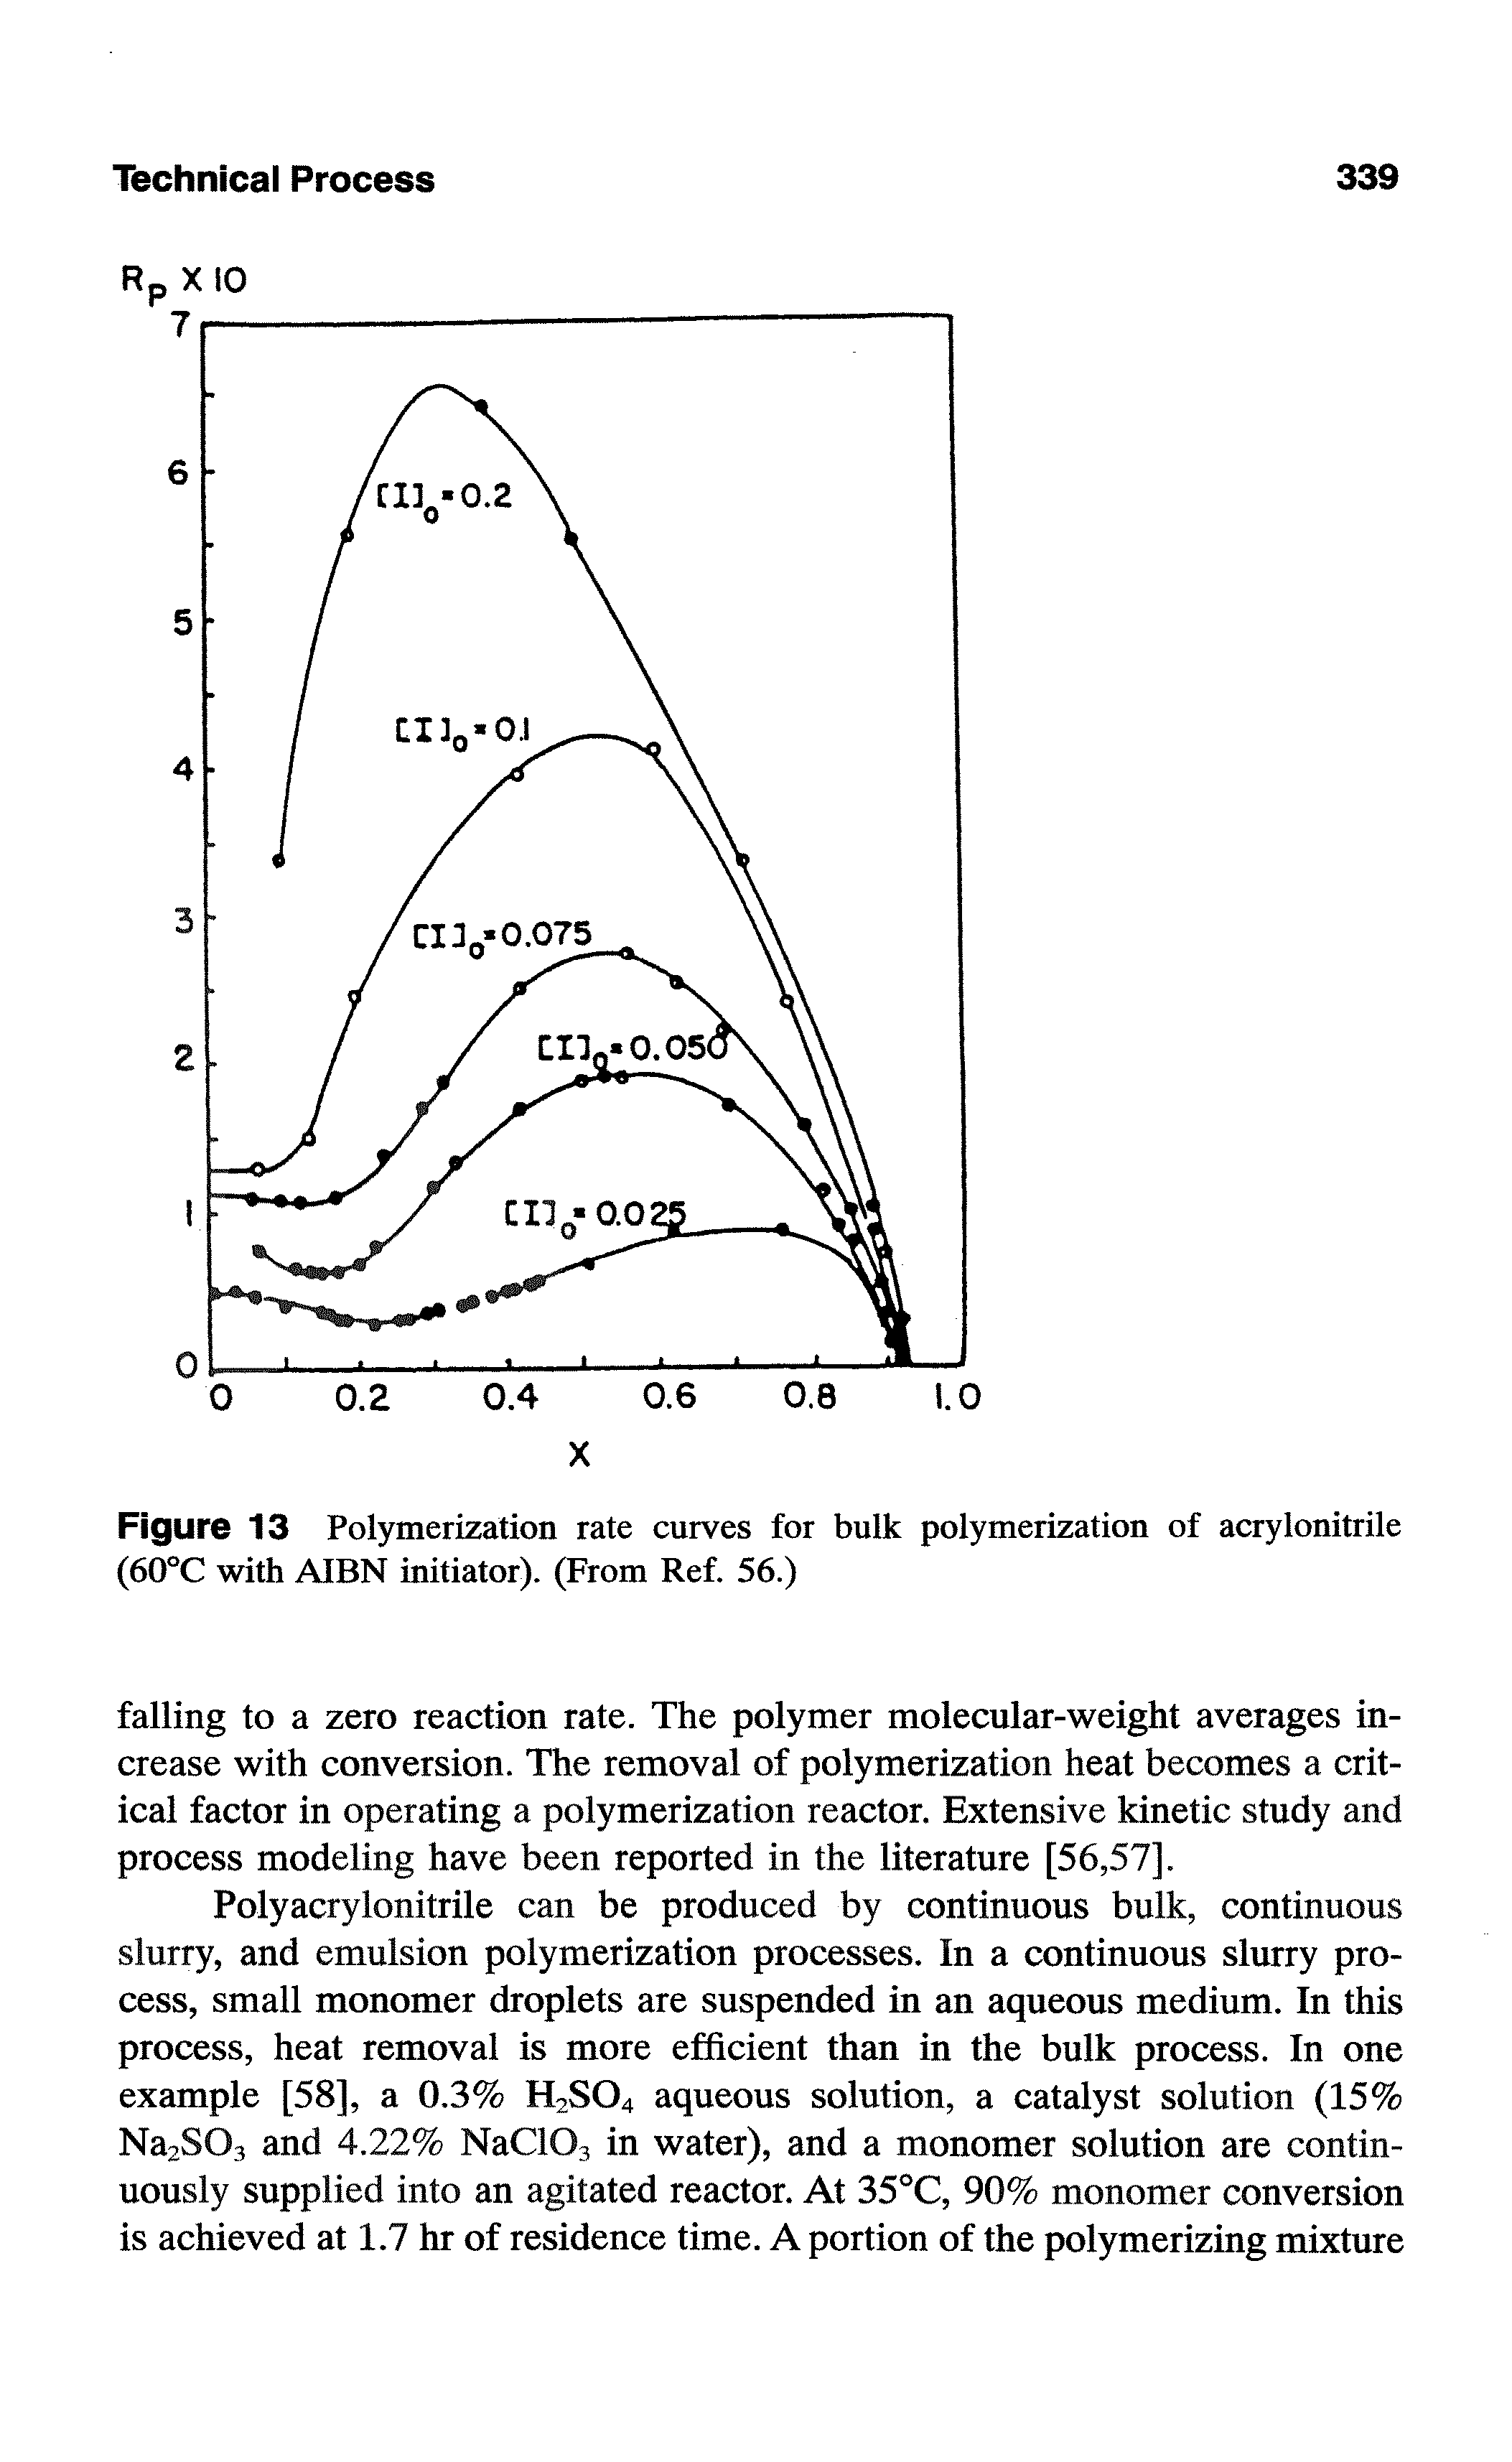 Figure 13 Polymerization rate curves for bulk polymerization of acrylonitrile (60°C with AIBN initiator). (From Ref. 56.)...